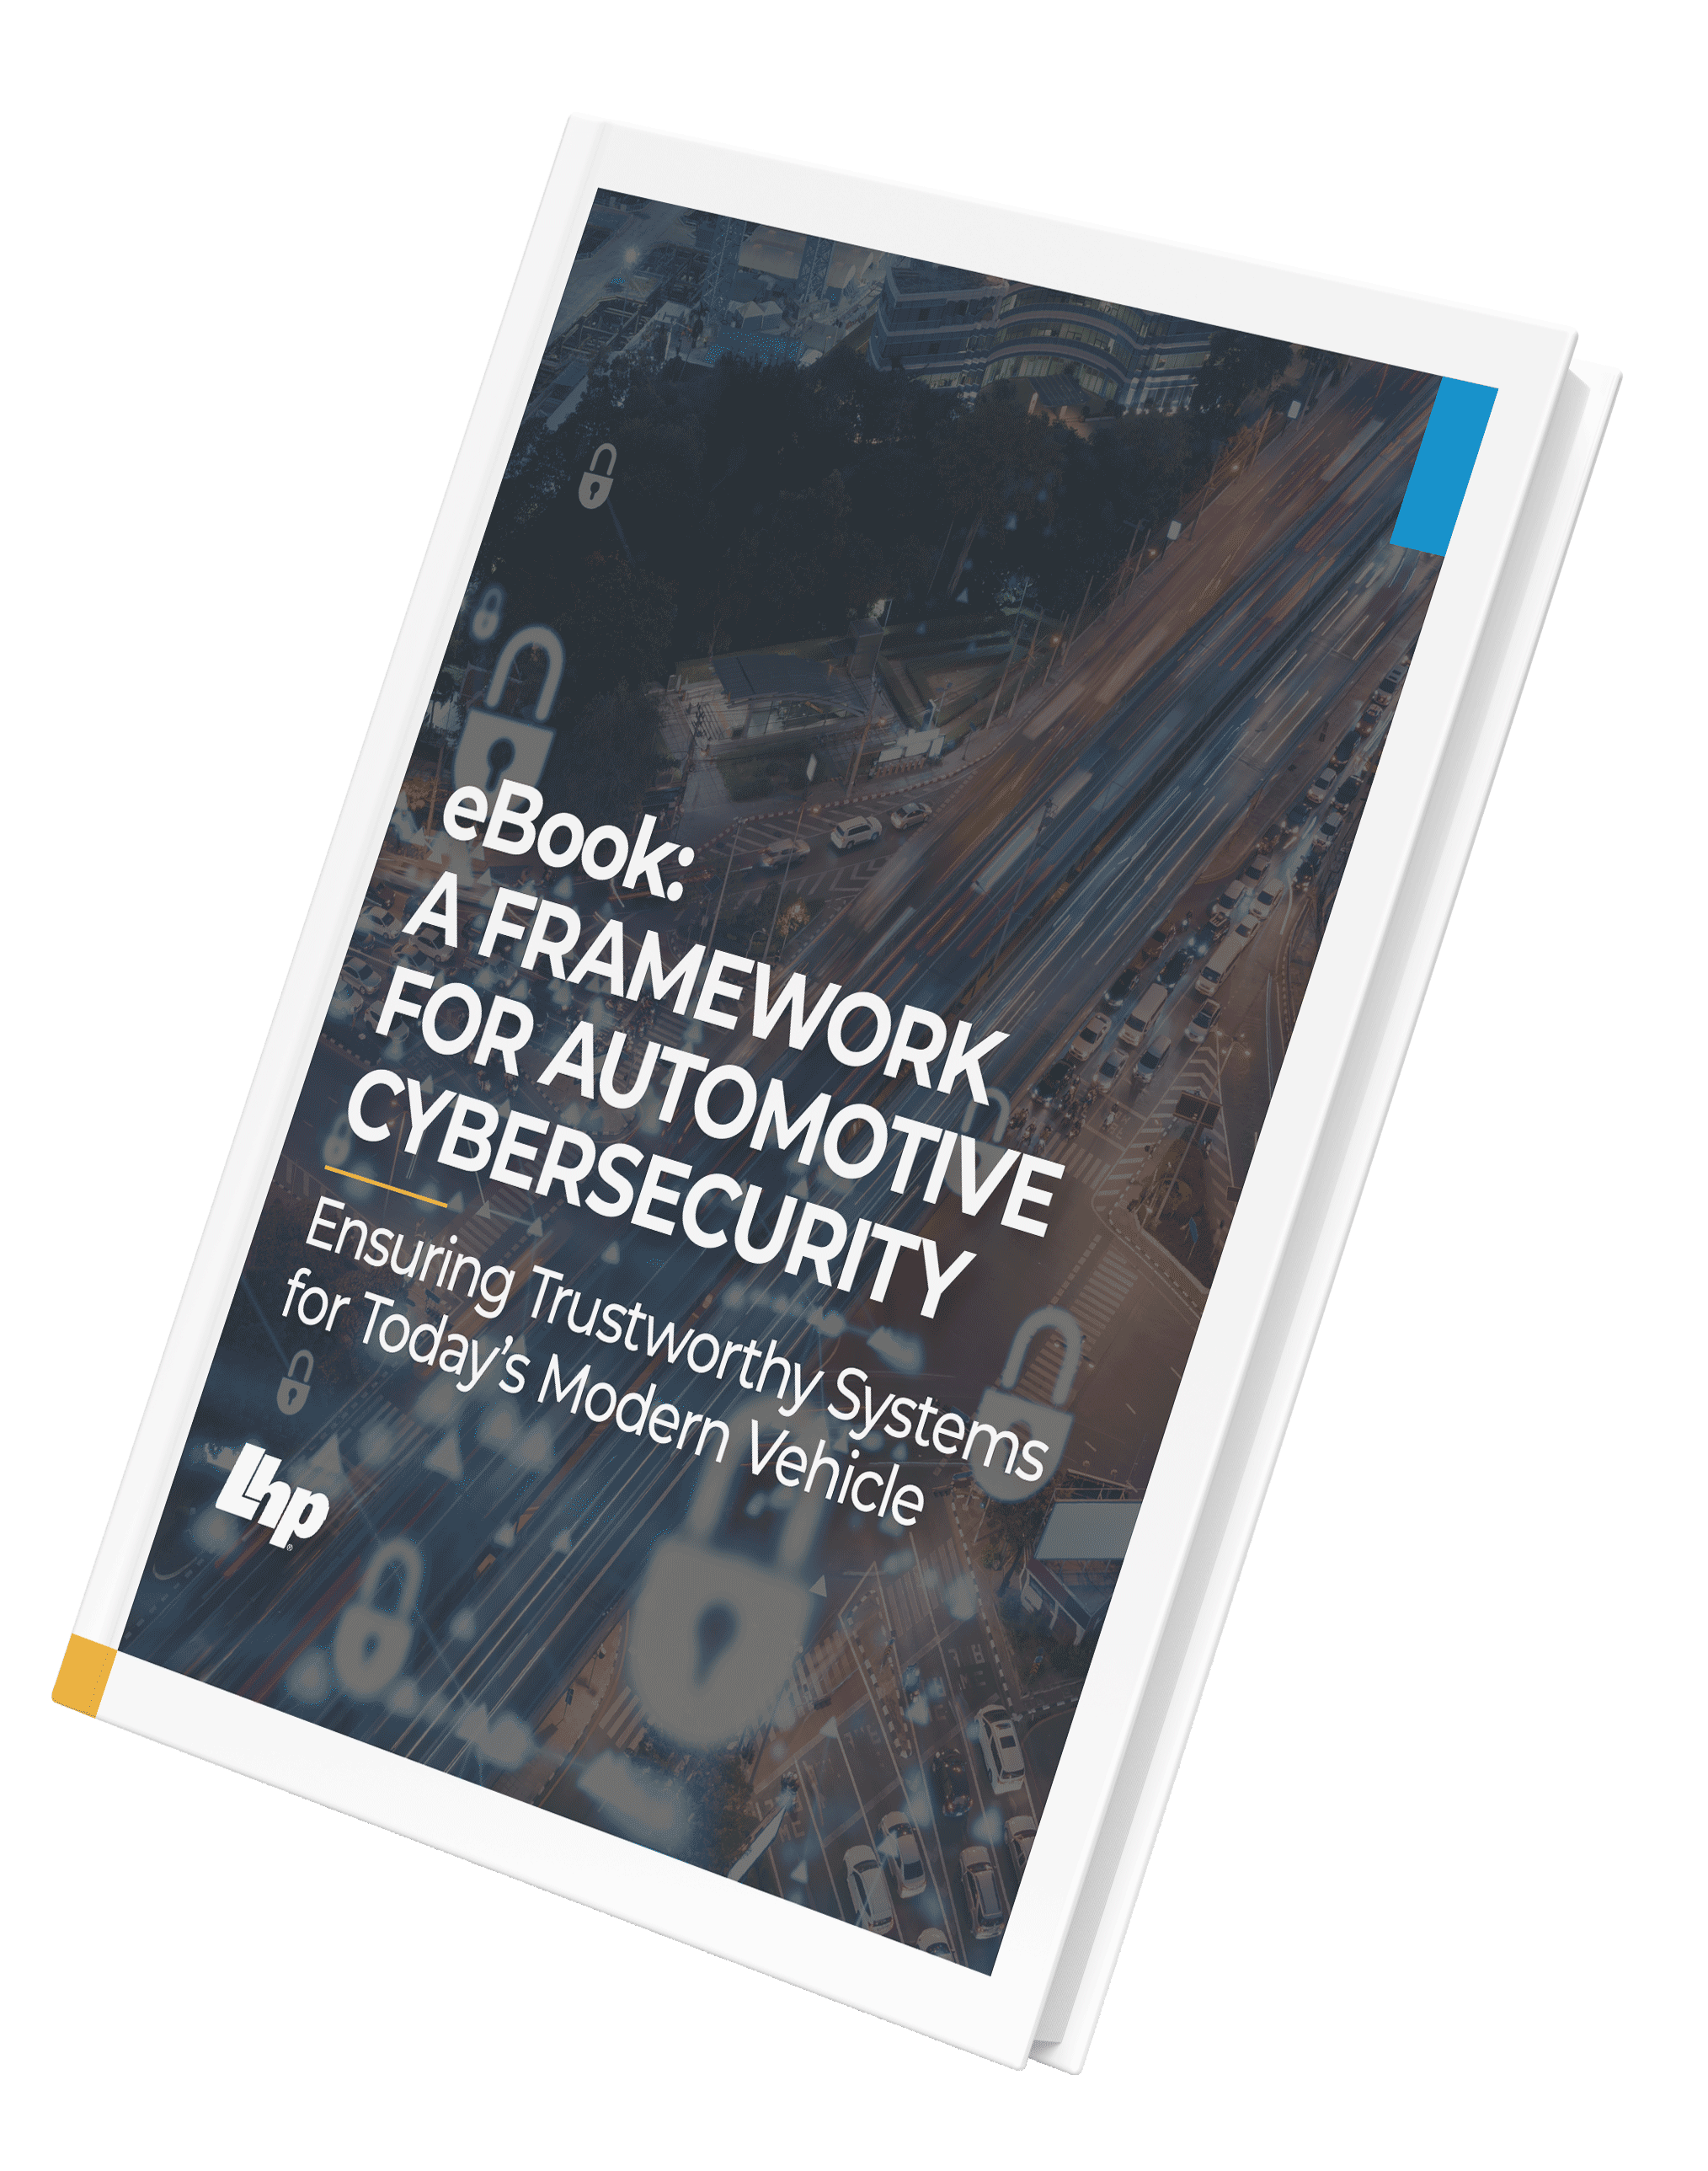 Framework-for-Automotive-Cybersecurity-resized